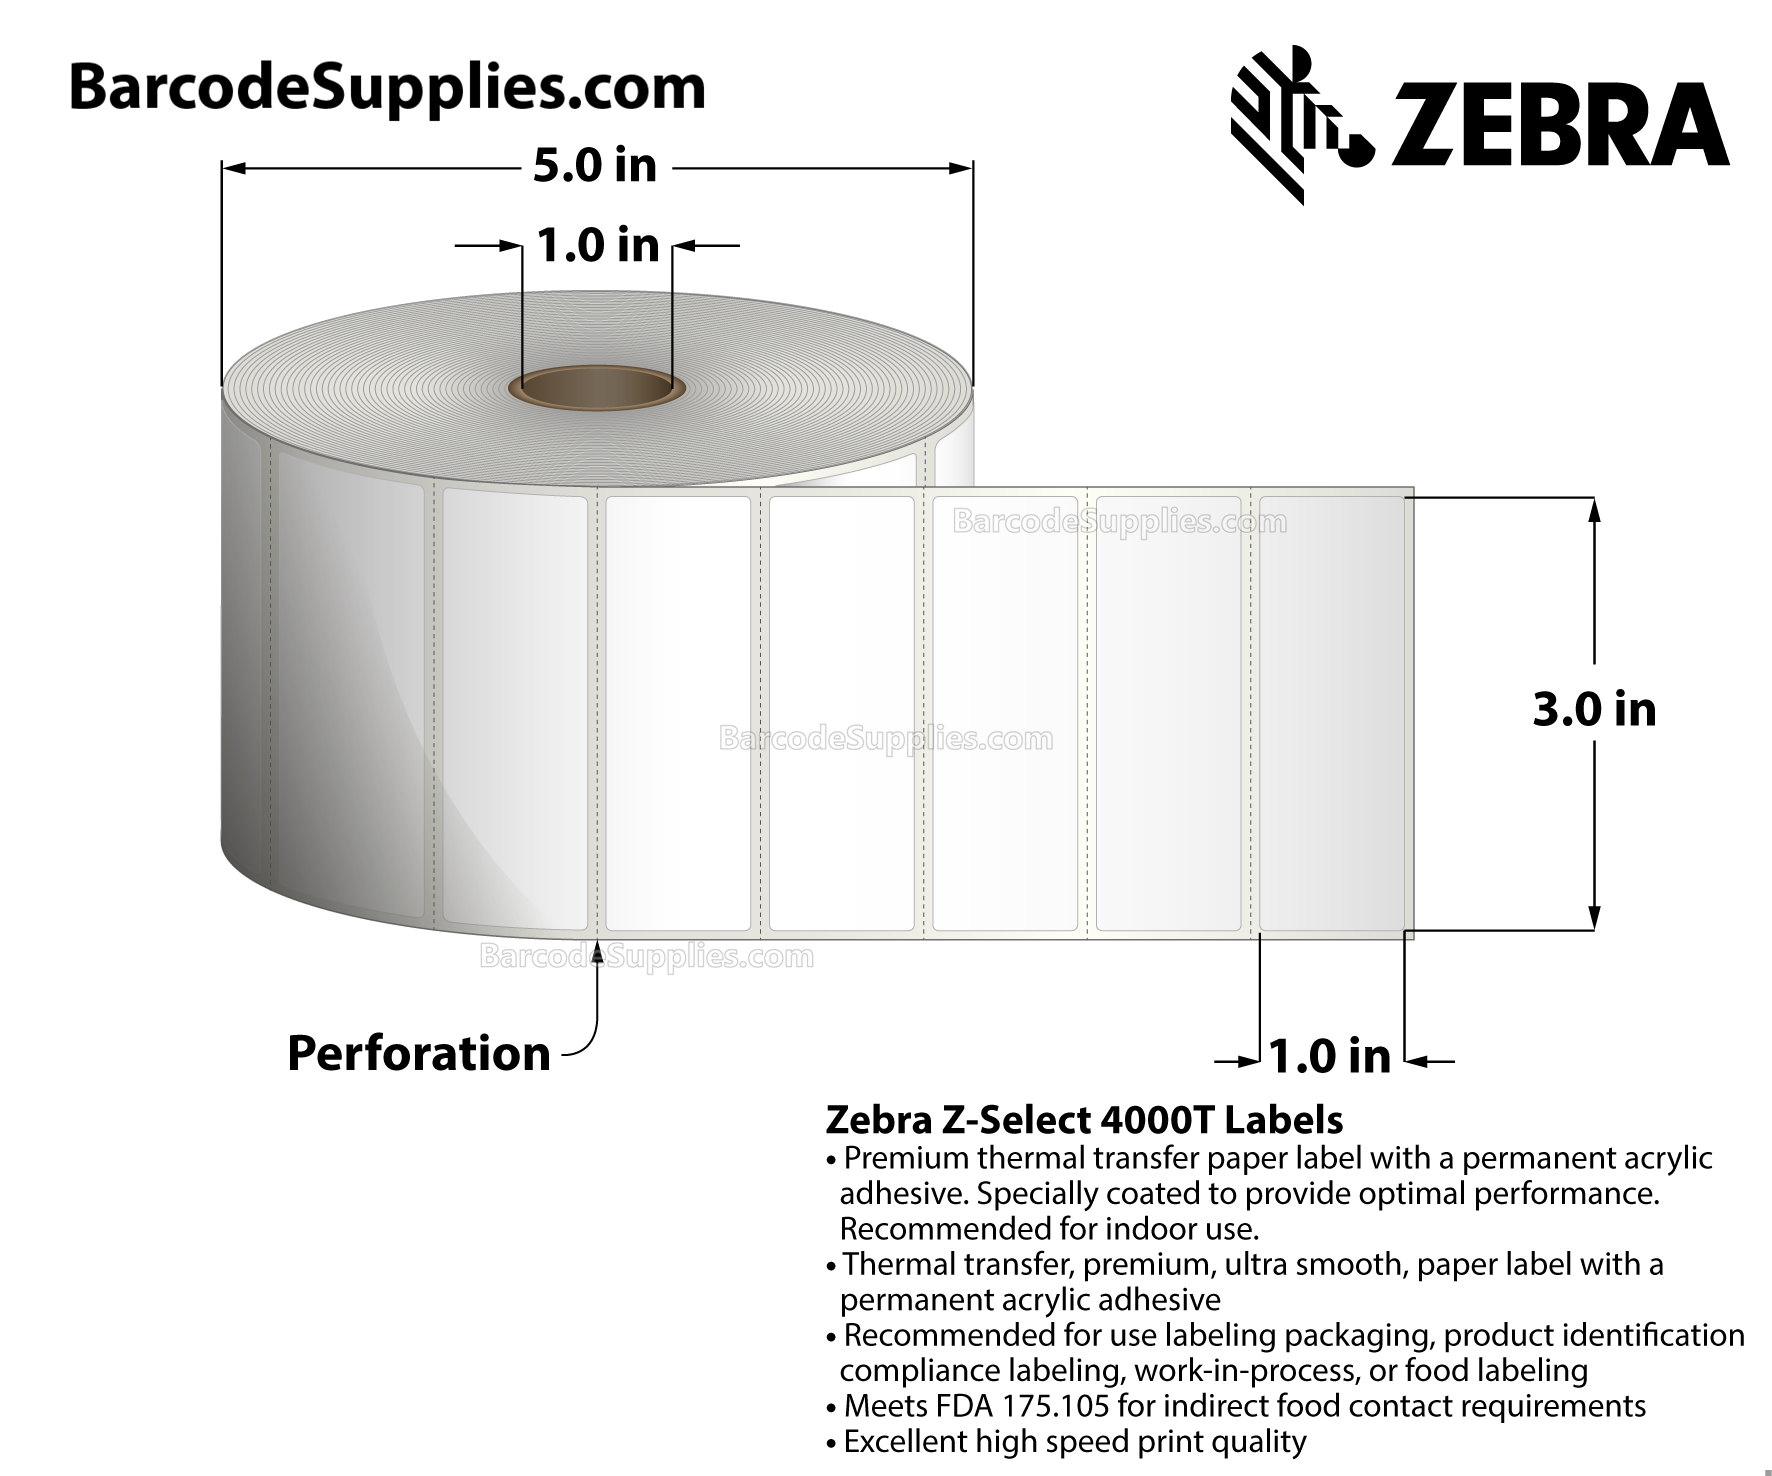 3 x 1 Thermal Transfer White Z-Select 4000T Labels With Permanent Adhesive - Perforated - 2580 Labels Per Roll - Carton Of 6 Rolls - 15480 Labels Total - MPN: 10009528